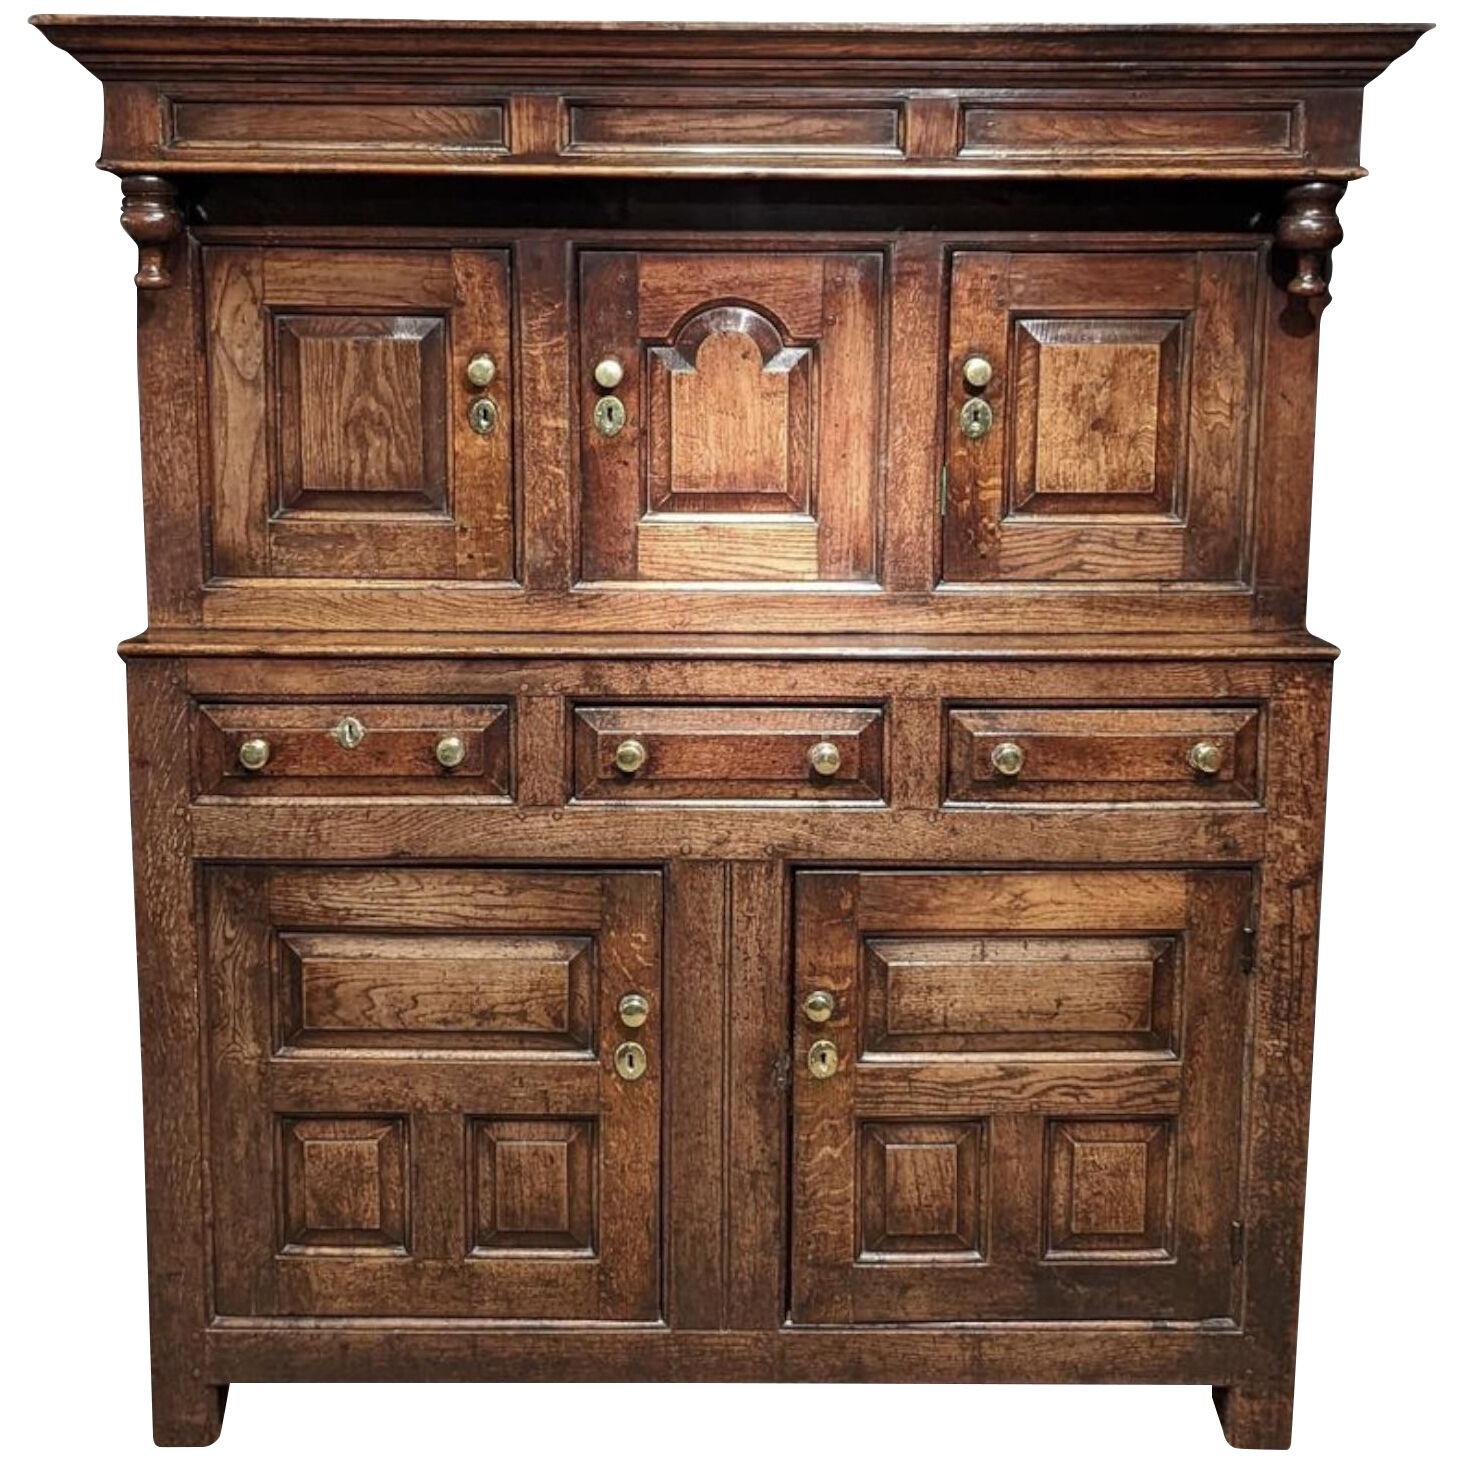 Late 17th Century Oak Cupboard with Panelled Doors